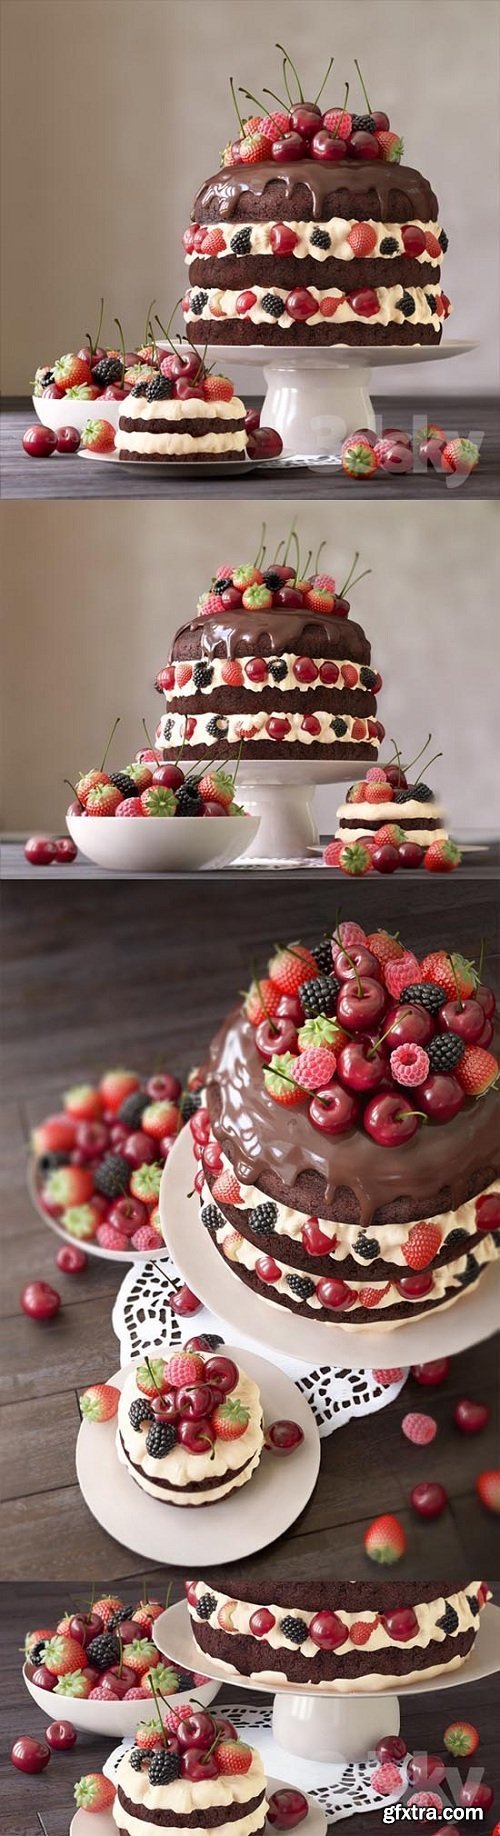 Cake and cake with berries 3d Model